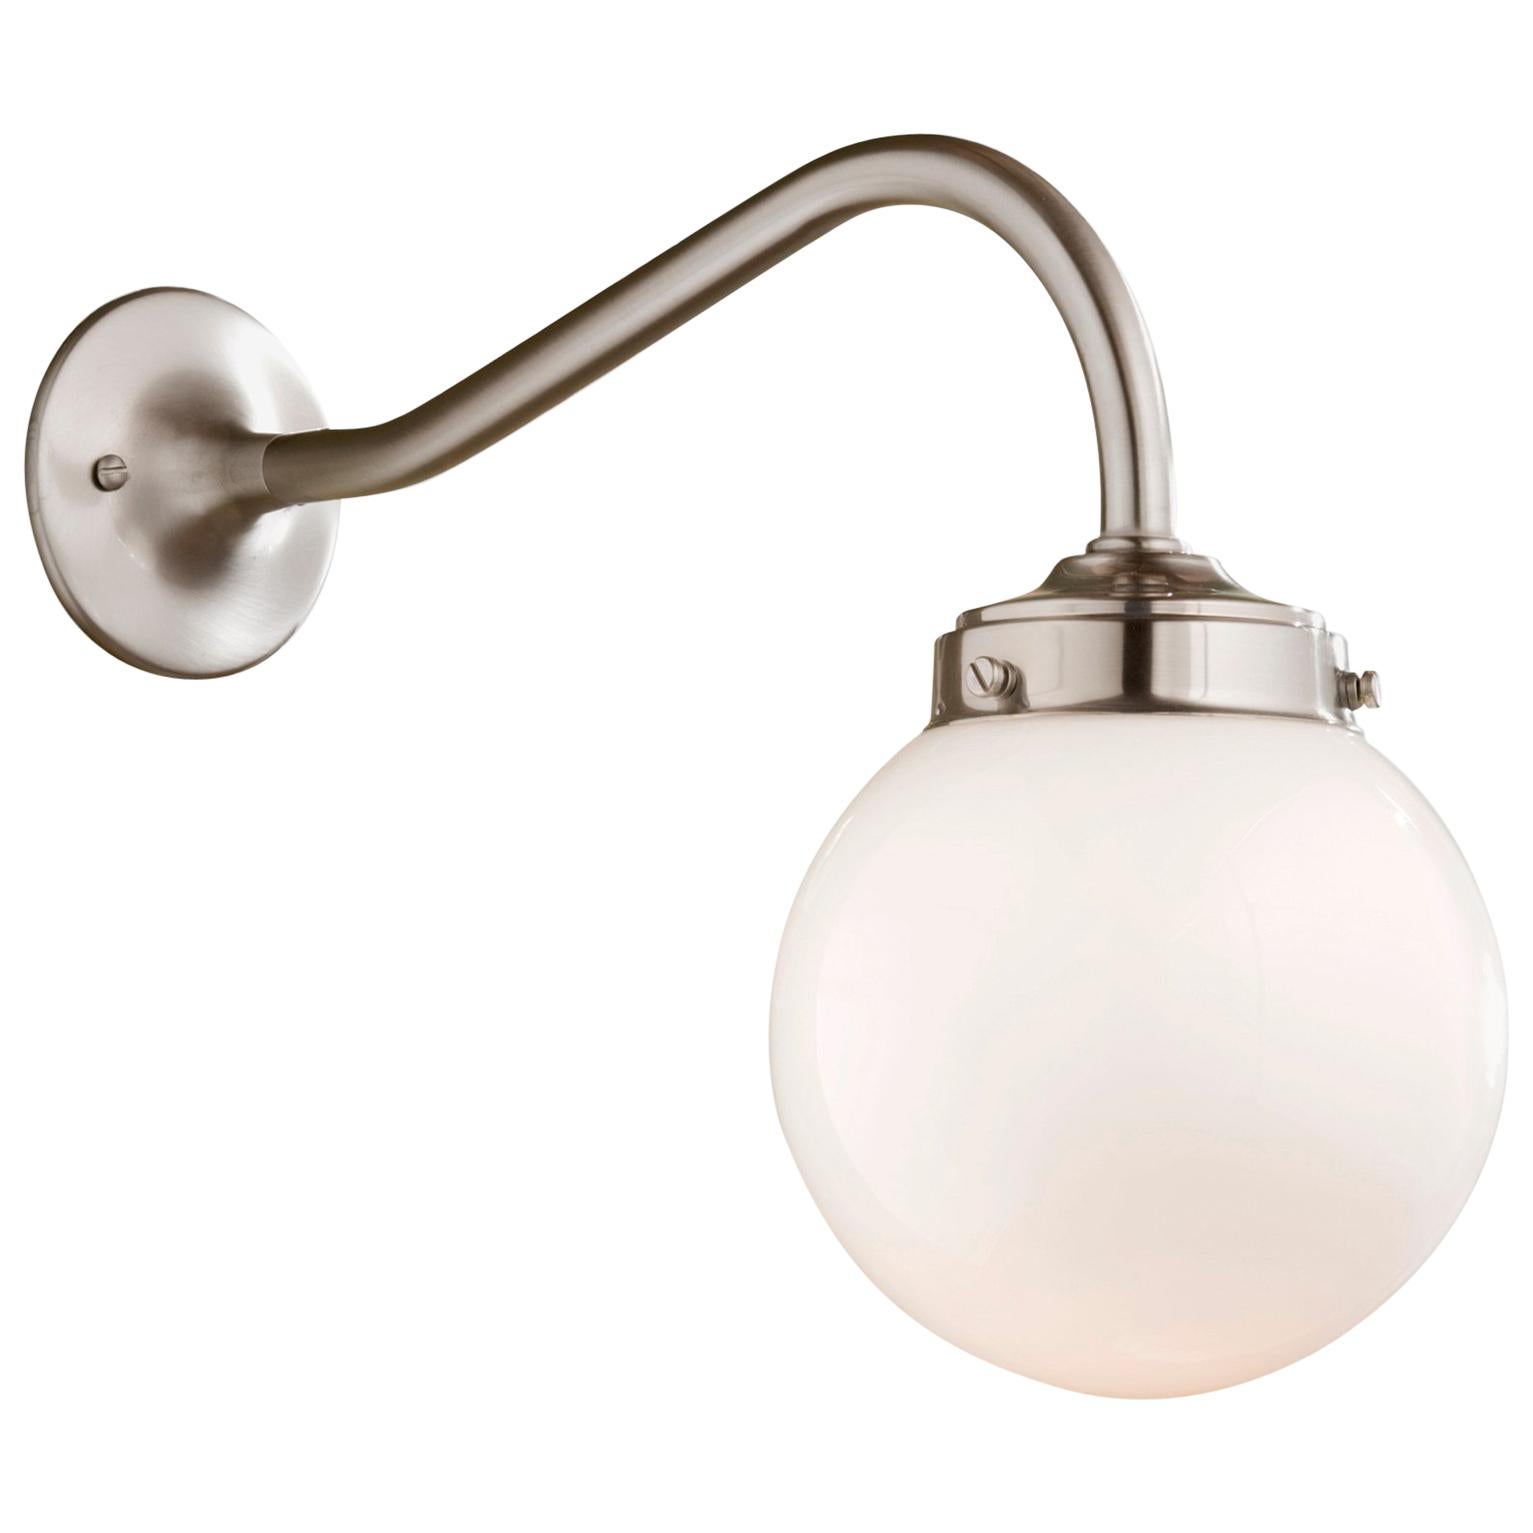 Tekna Clovelly Wall Light with Brushed Nickel Finish